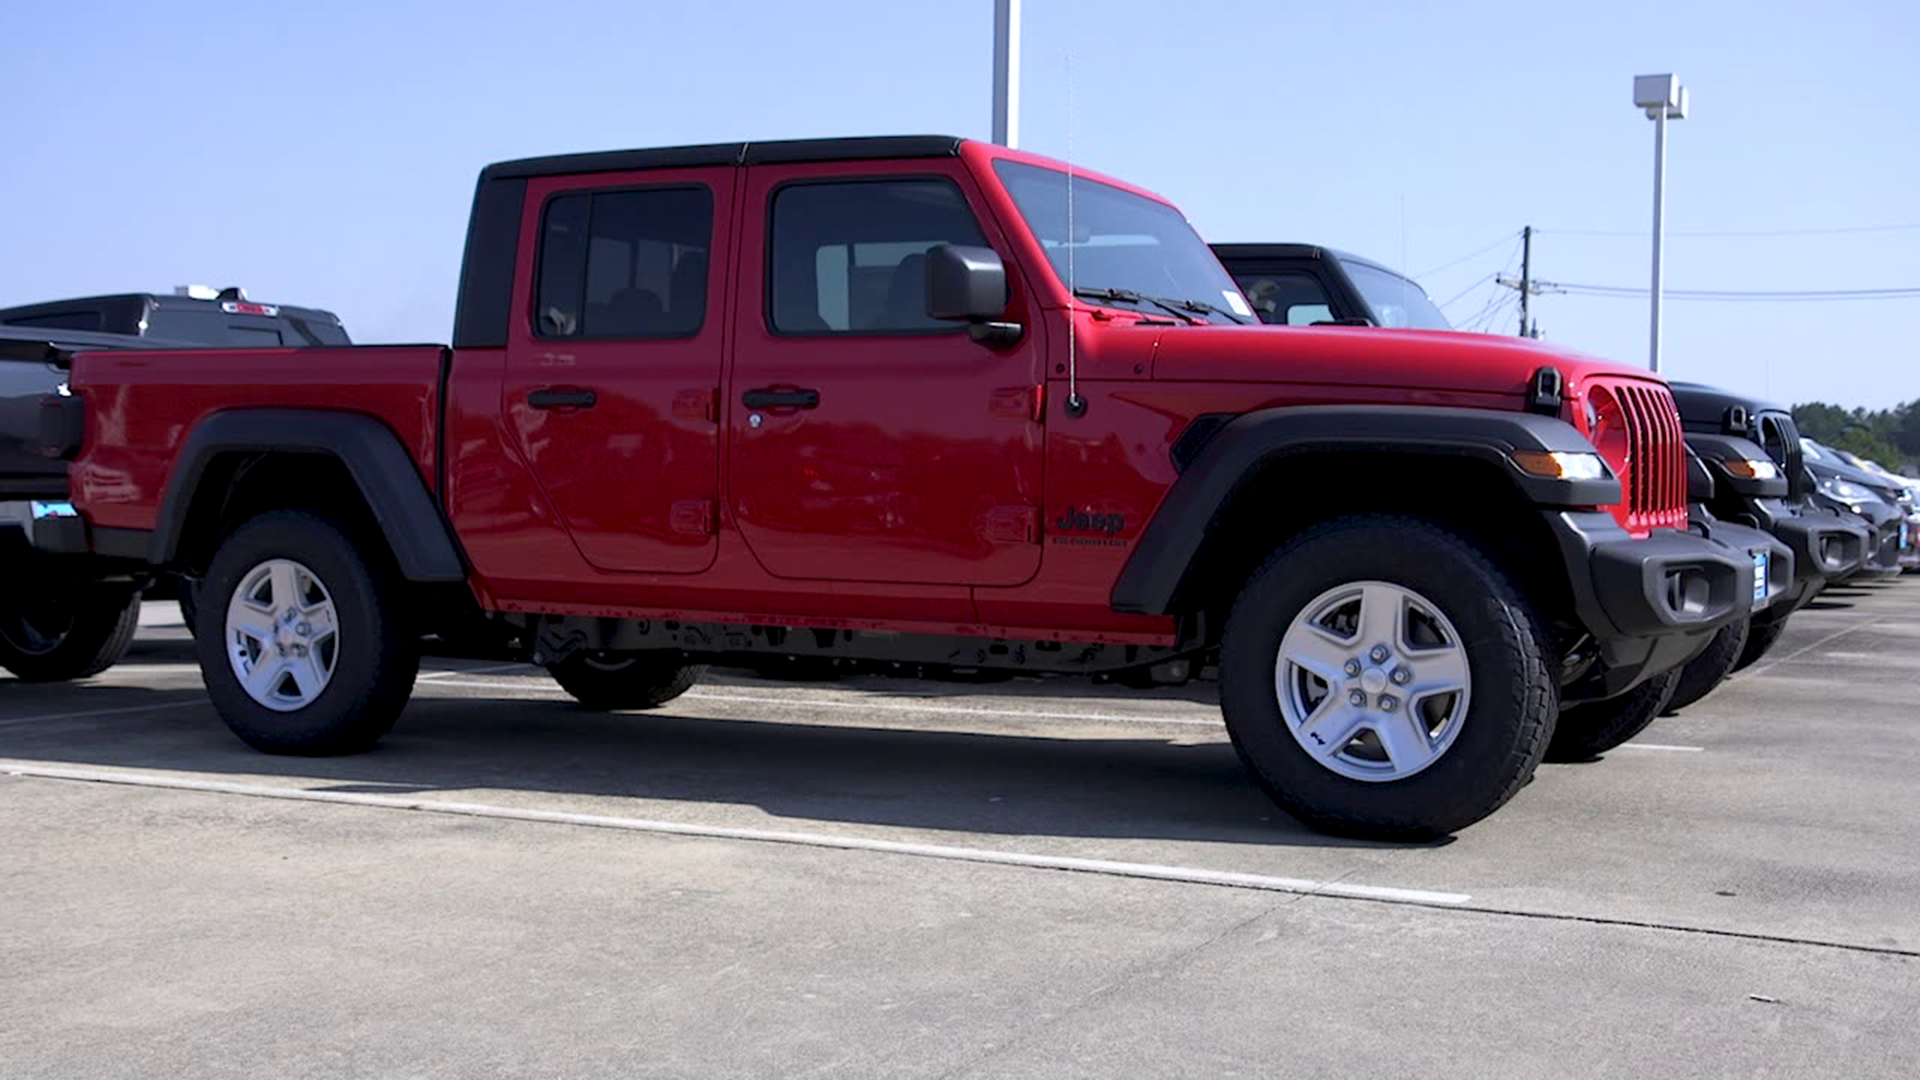 Today we took a 2020 Jeep Gladiator Overland out for a spin. Call Moore Chrysler Dodge Jeep Ram in Silsbee at (409) 385-3796 or visit them at http://1MooreCDJR.com to get yours!